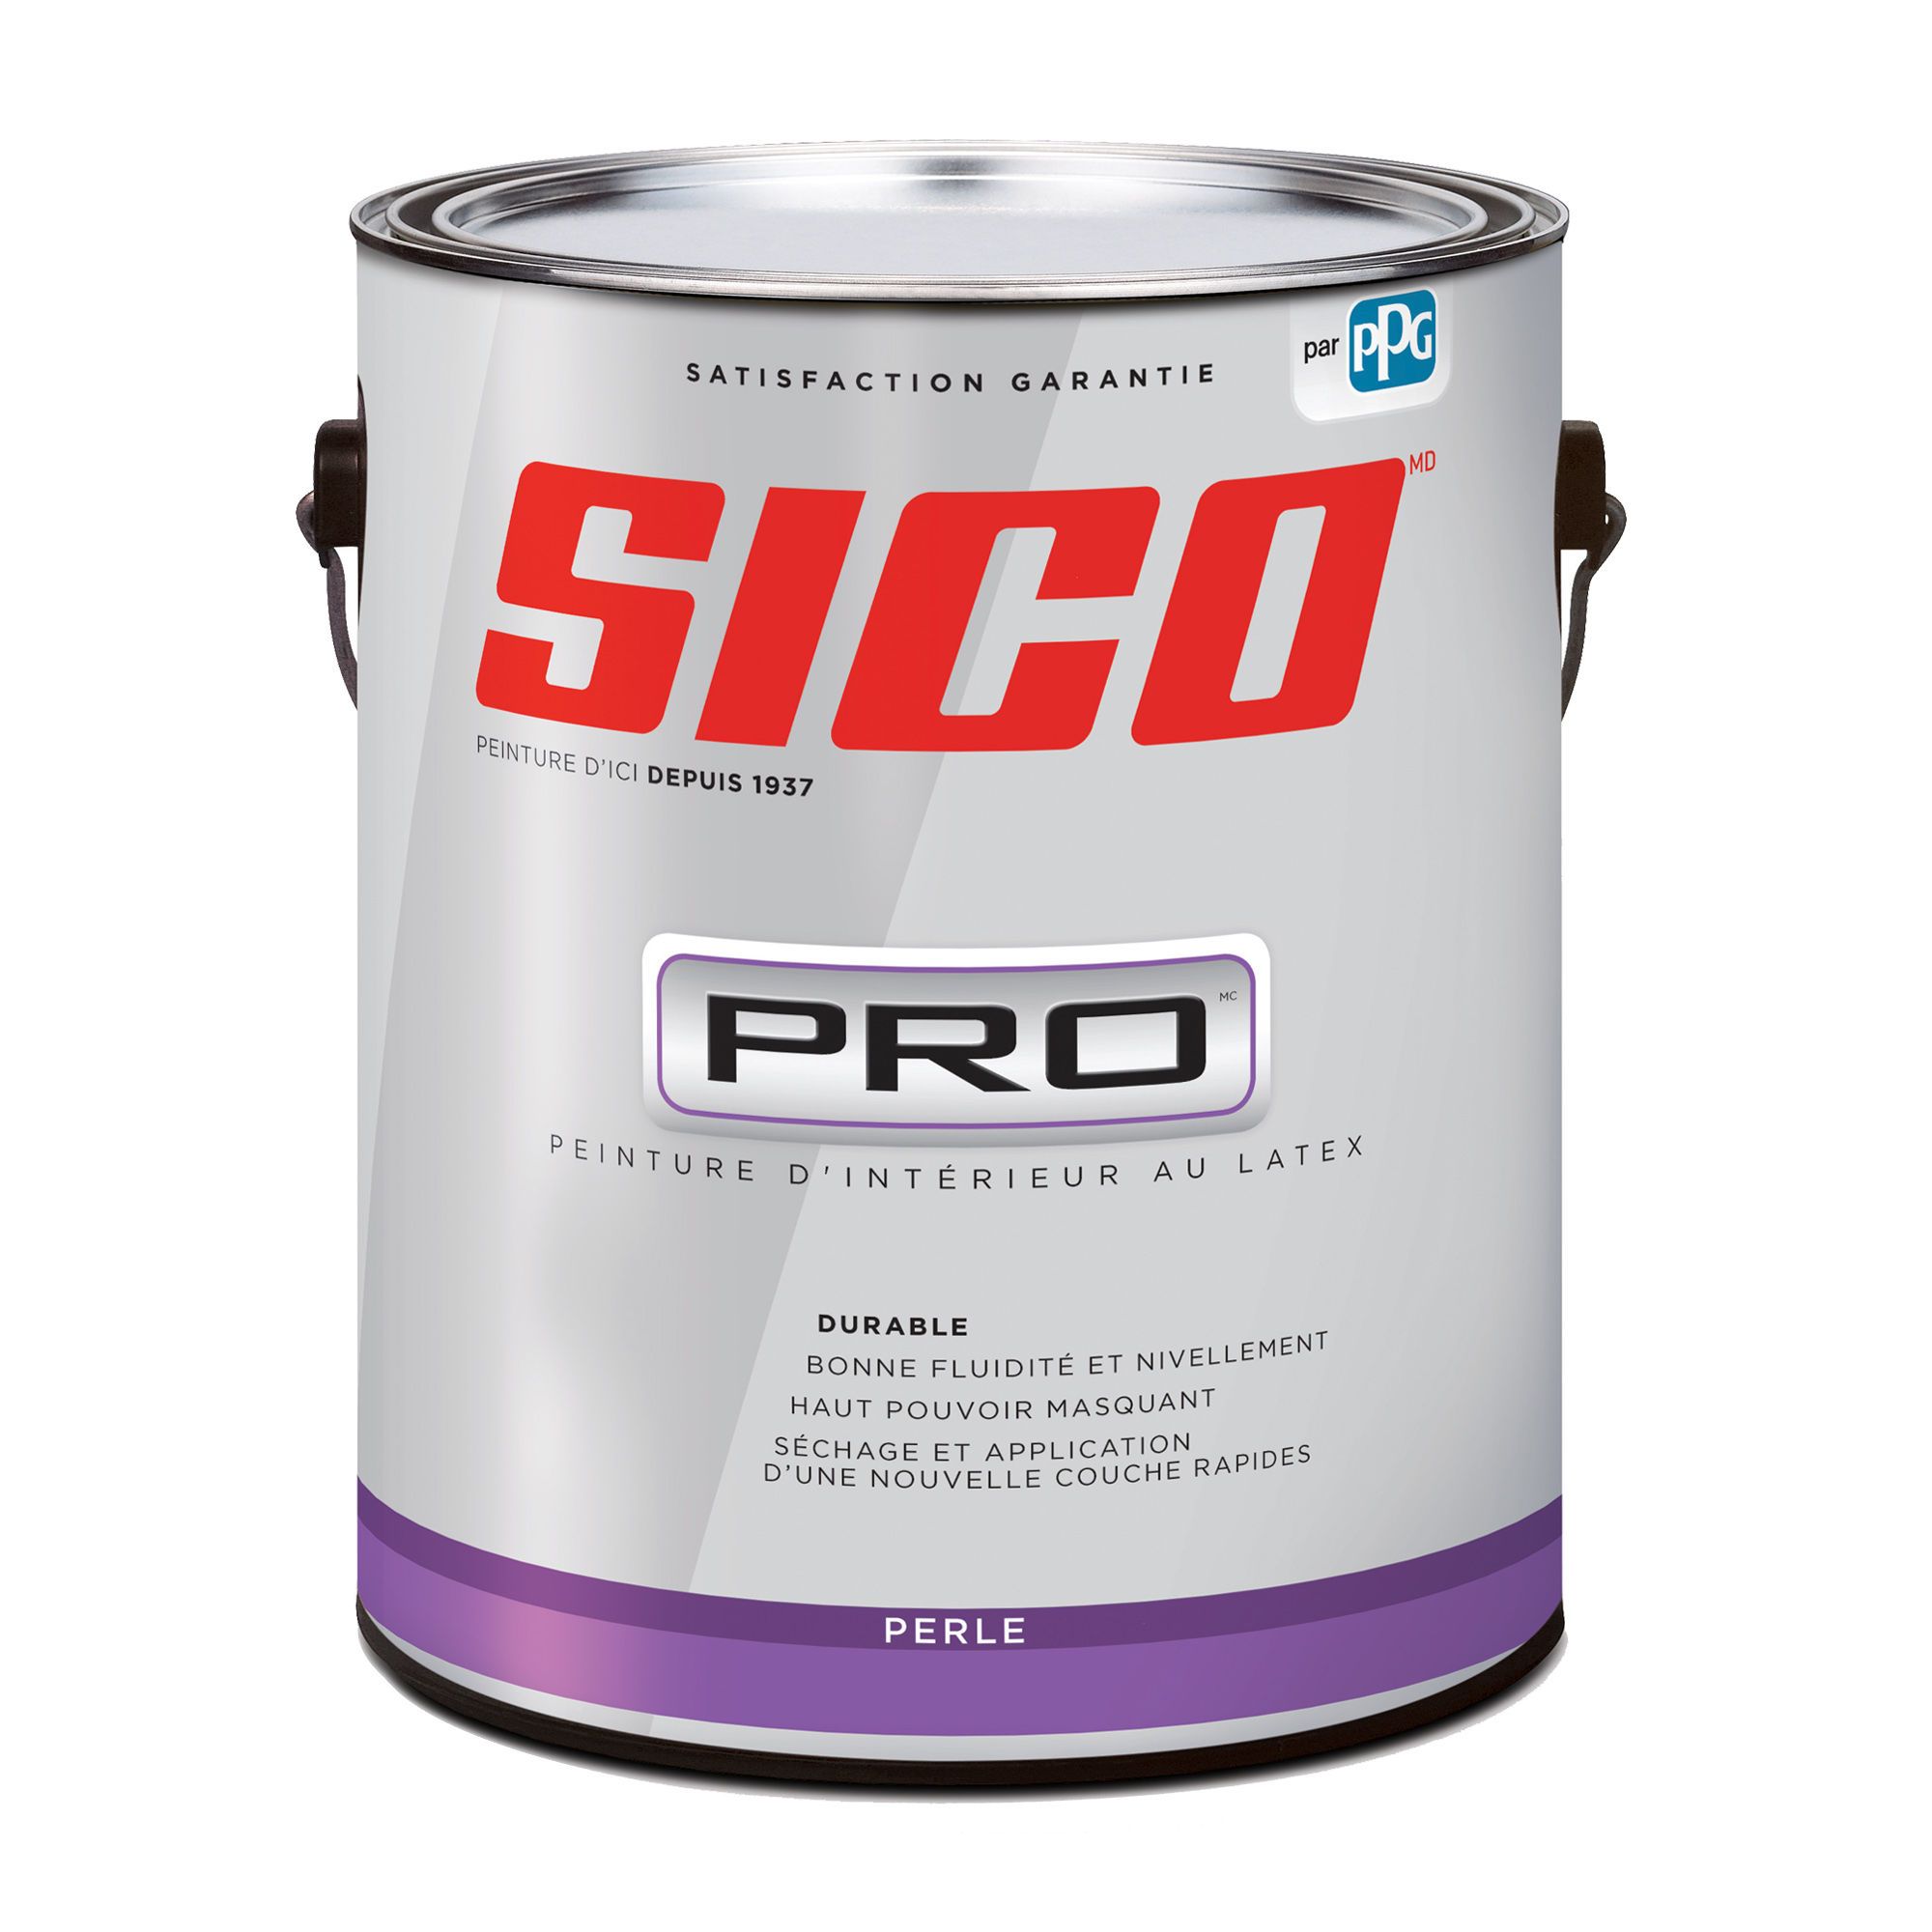 Paint SICO Pro, Pearl, Base 1, 3.78 L from SICO